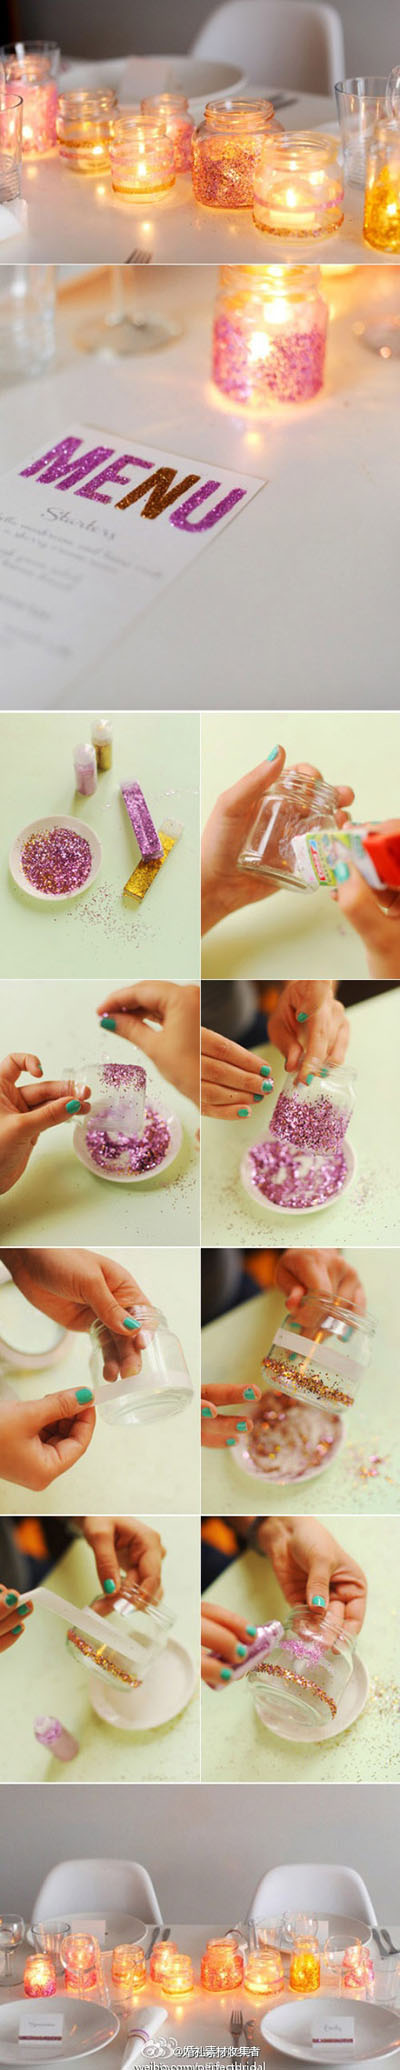 16 DIY jars. inexpensive way to dress up your table for the party54e8